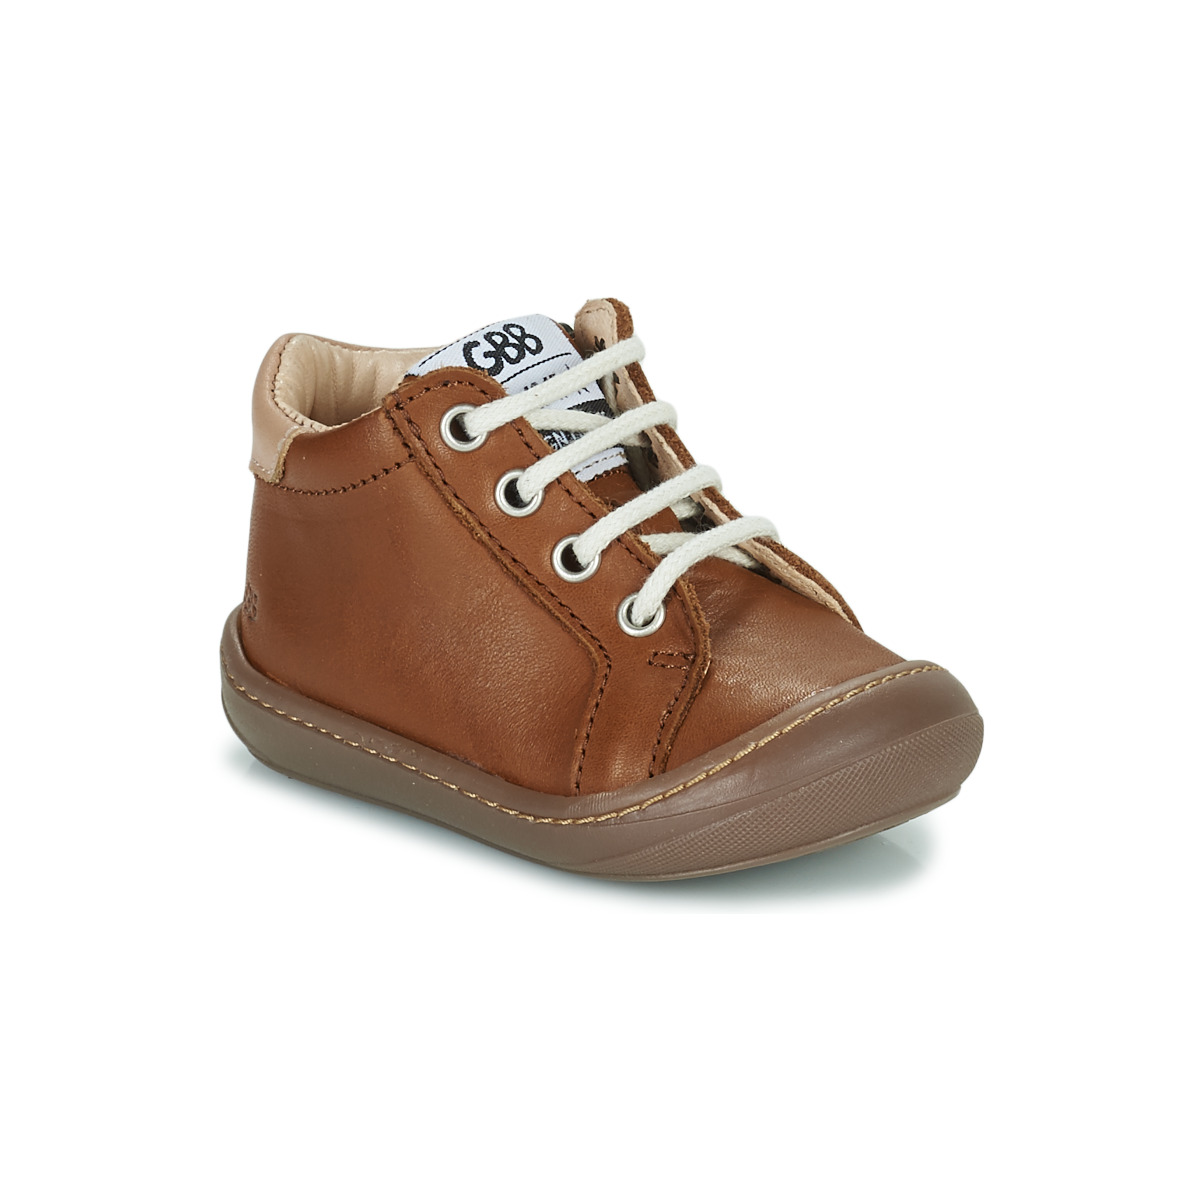 Shoes Children Hi top trainers GBB BAMBINO Brown